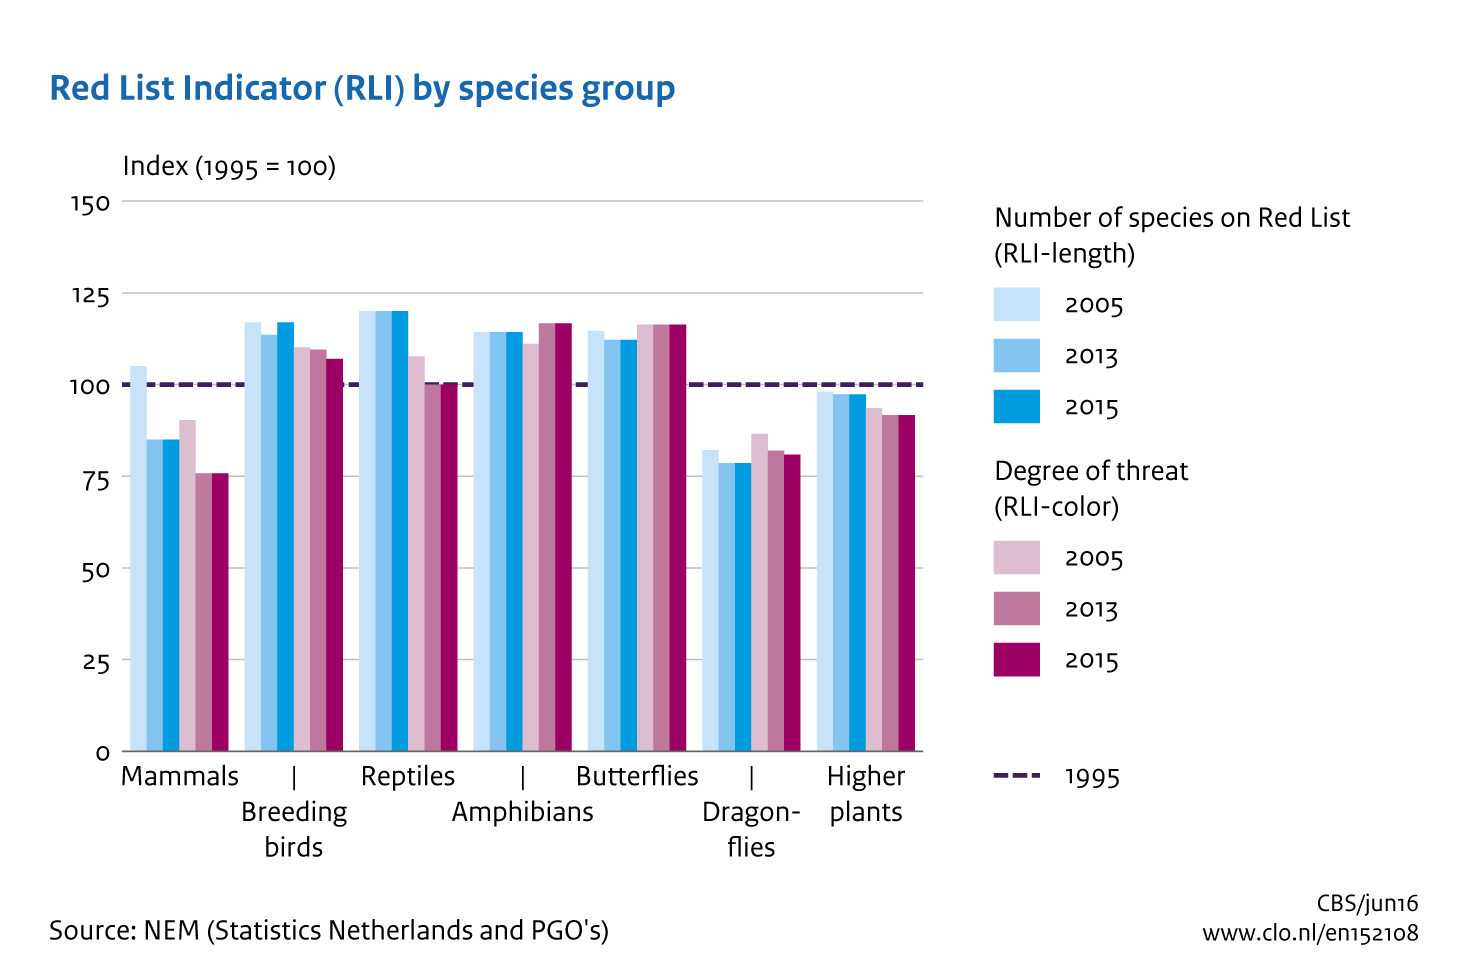 Image rli per group of species compared to the situation in 1995. The image is further explained in the text.